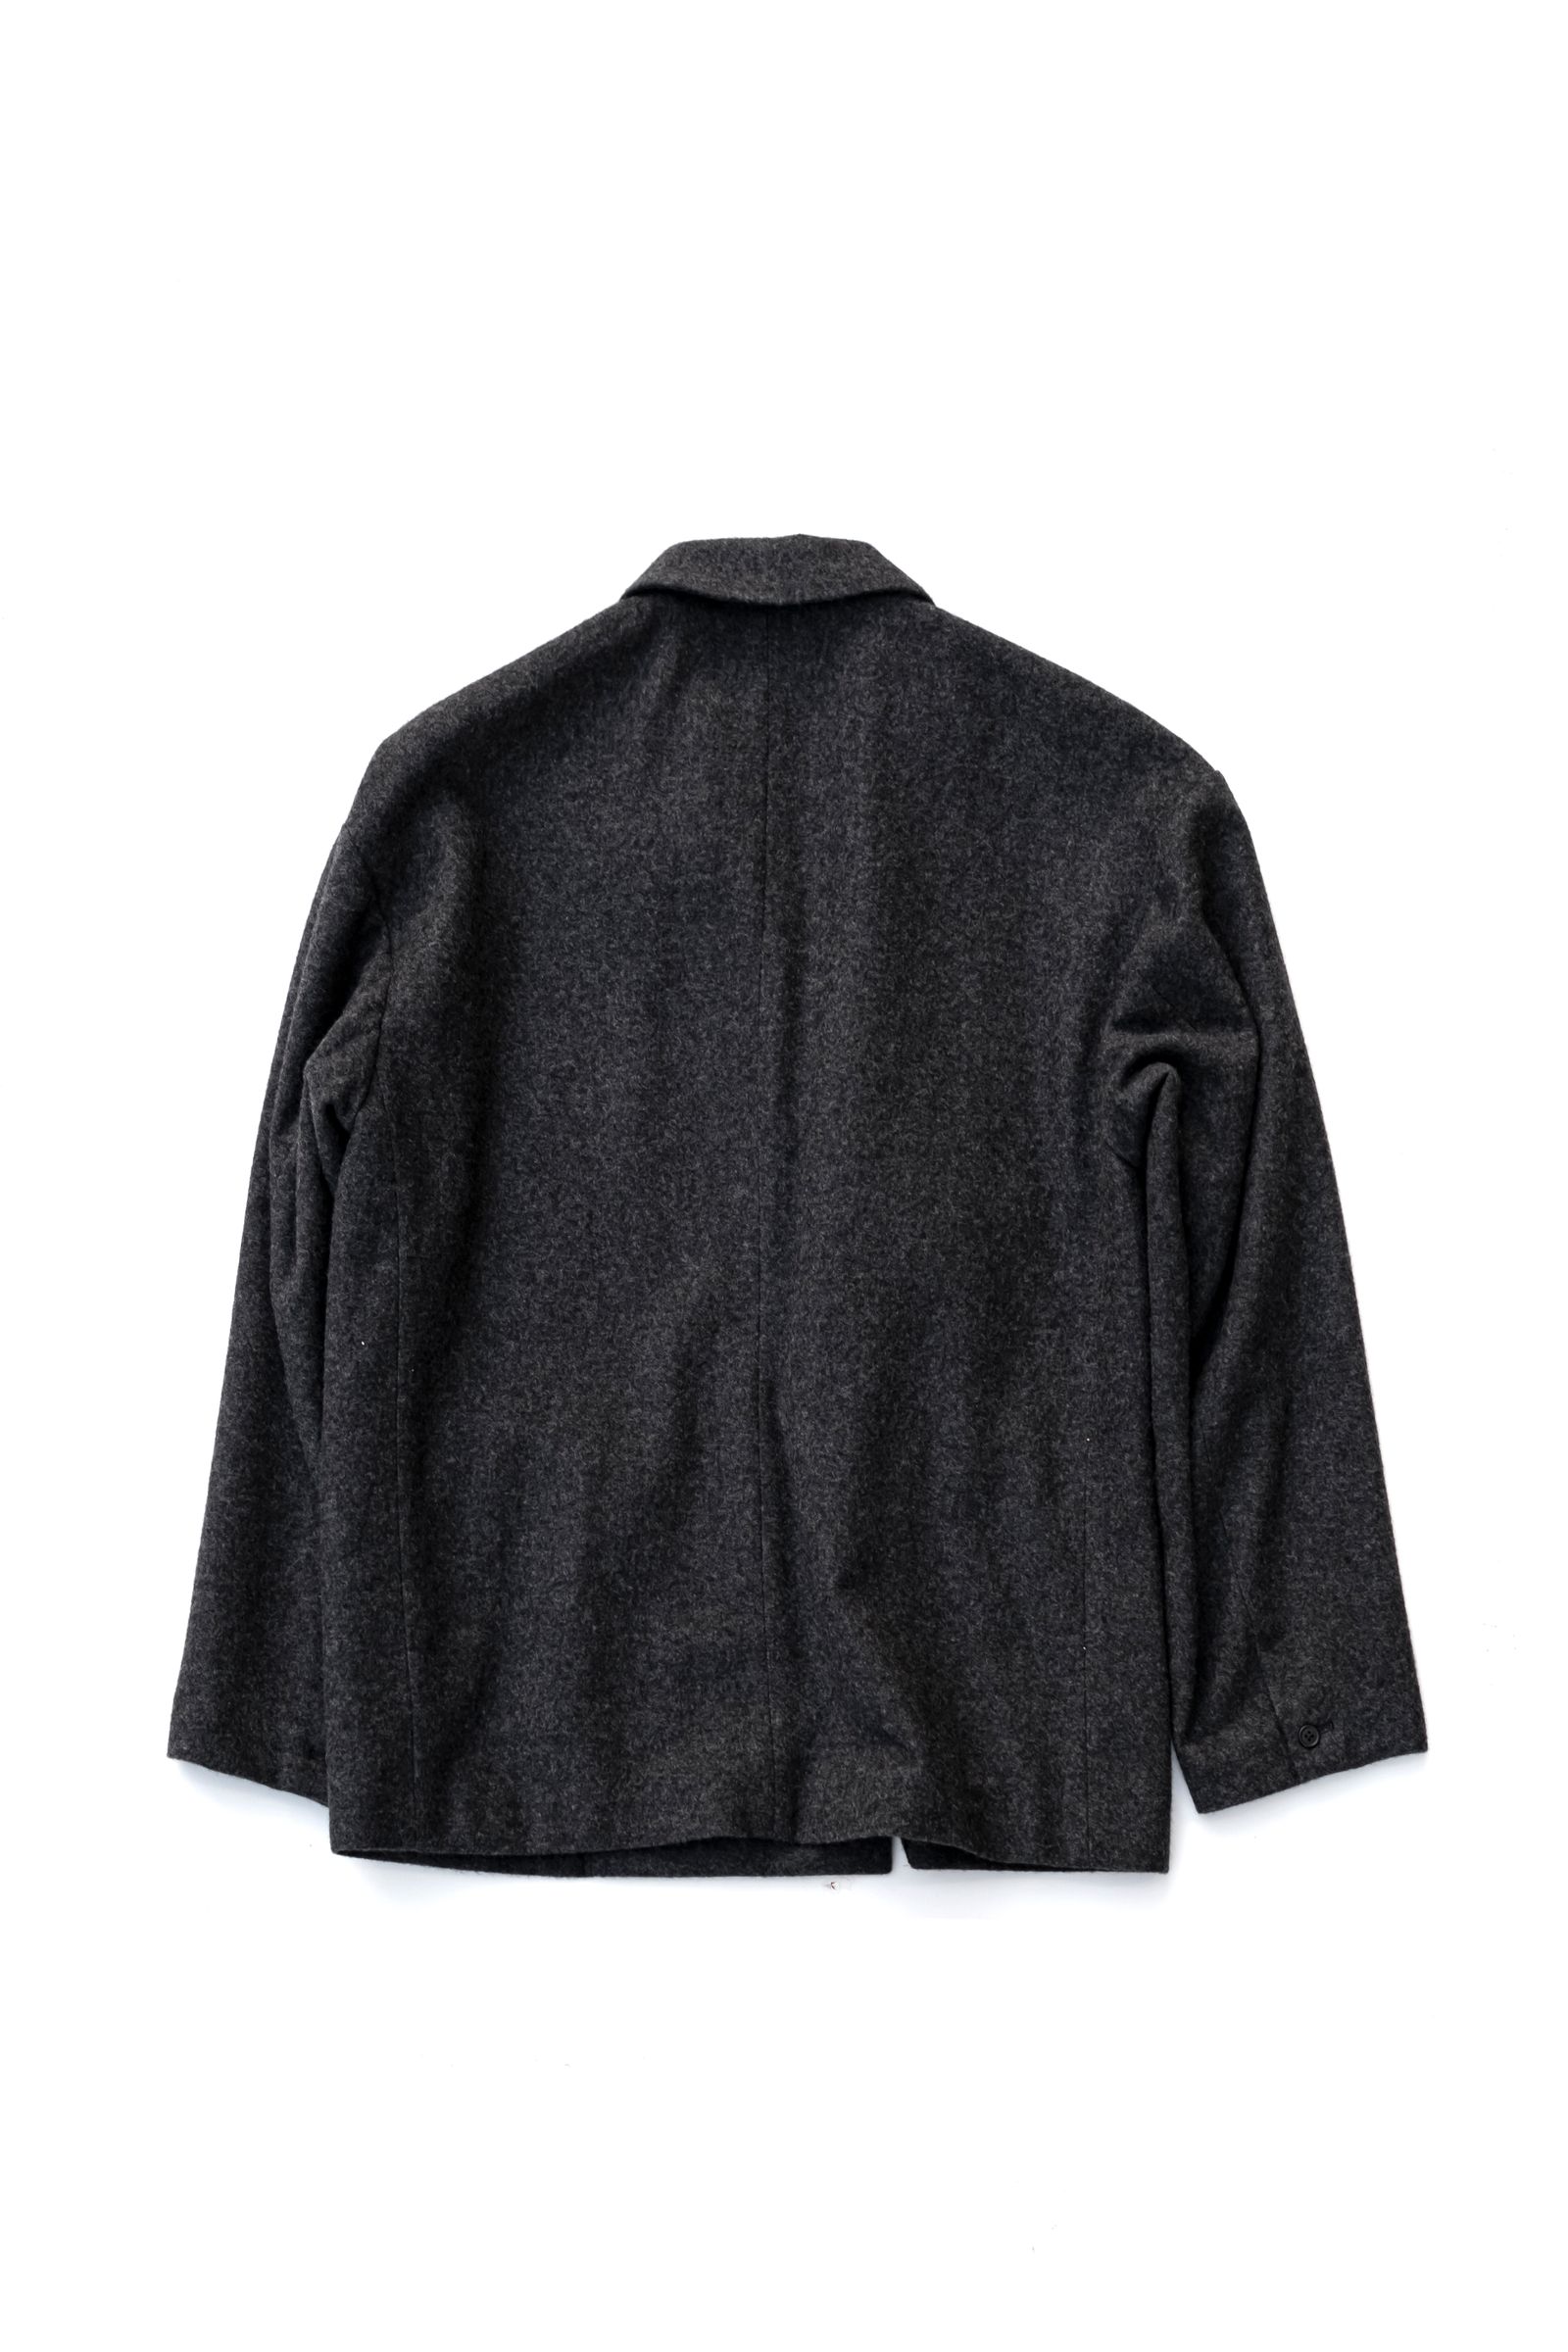 Blanc YM - Cashmere wool unconstructed JKT / Gray | Retikle Online Store